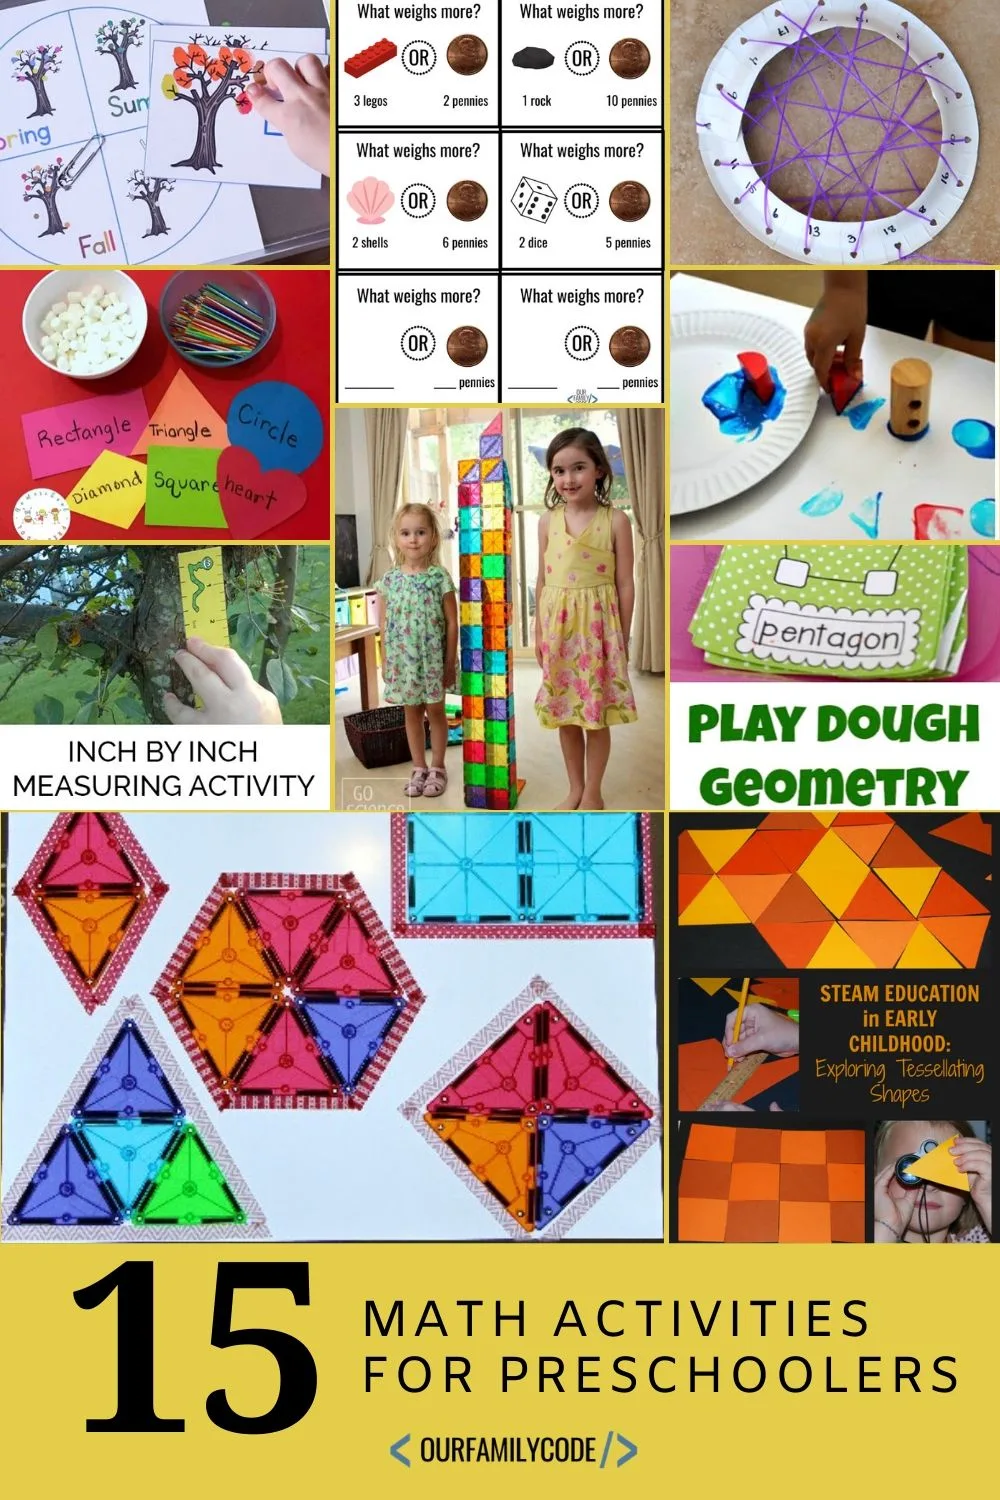 A picture of a collage of math activities for preschoolers.